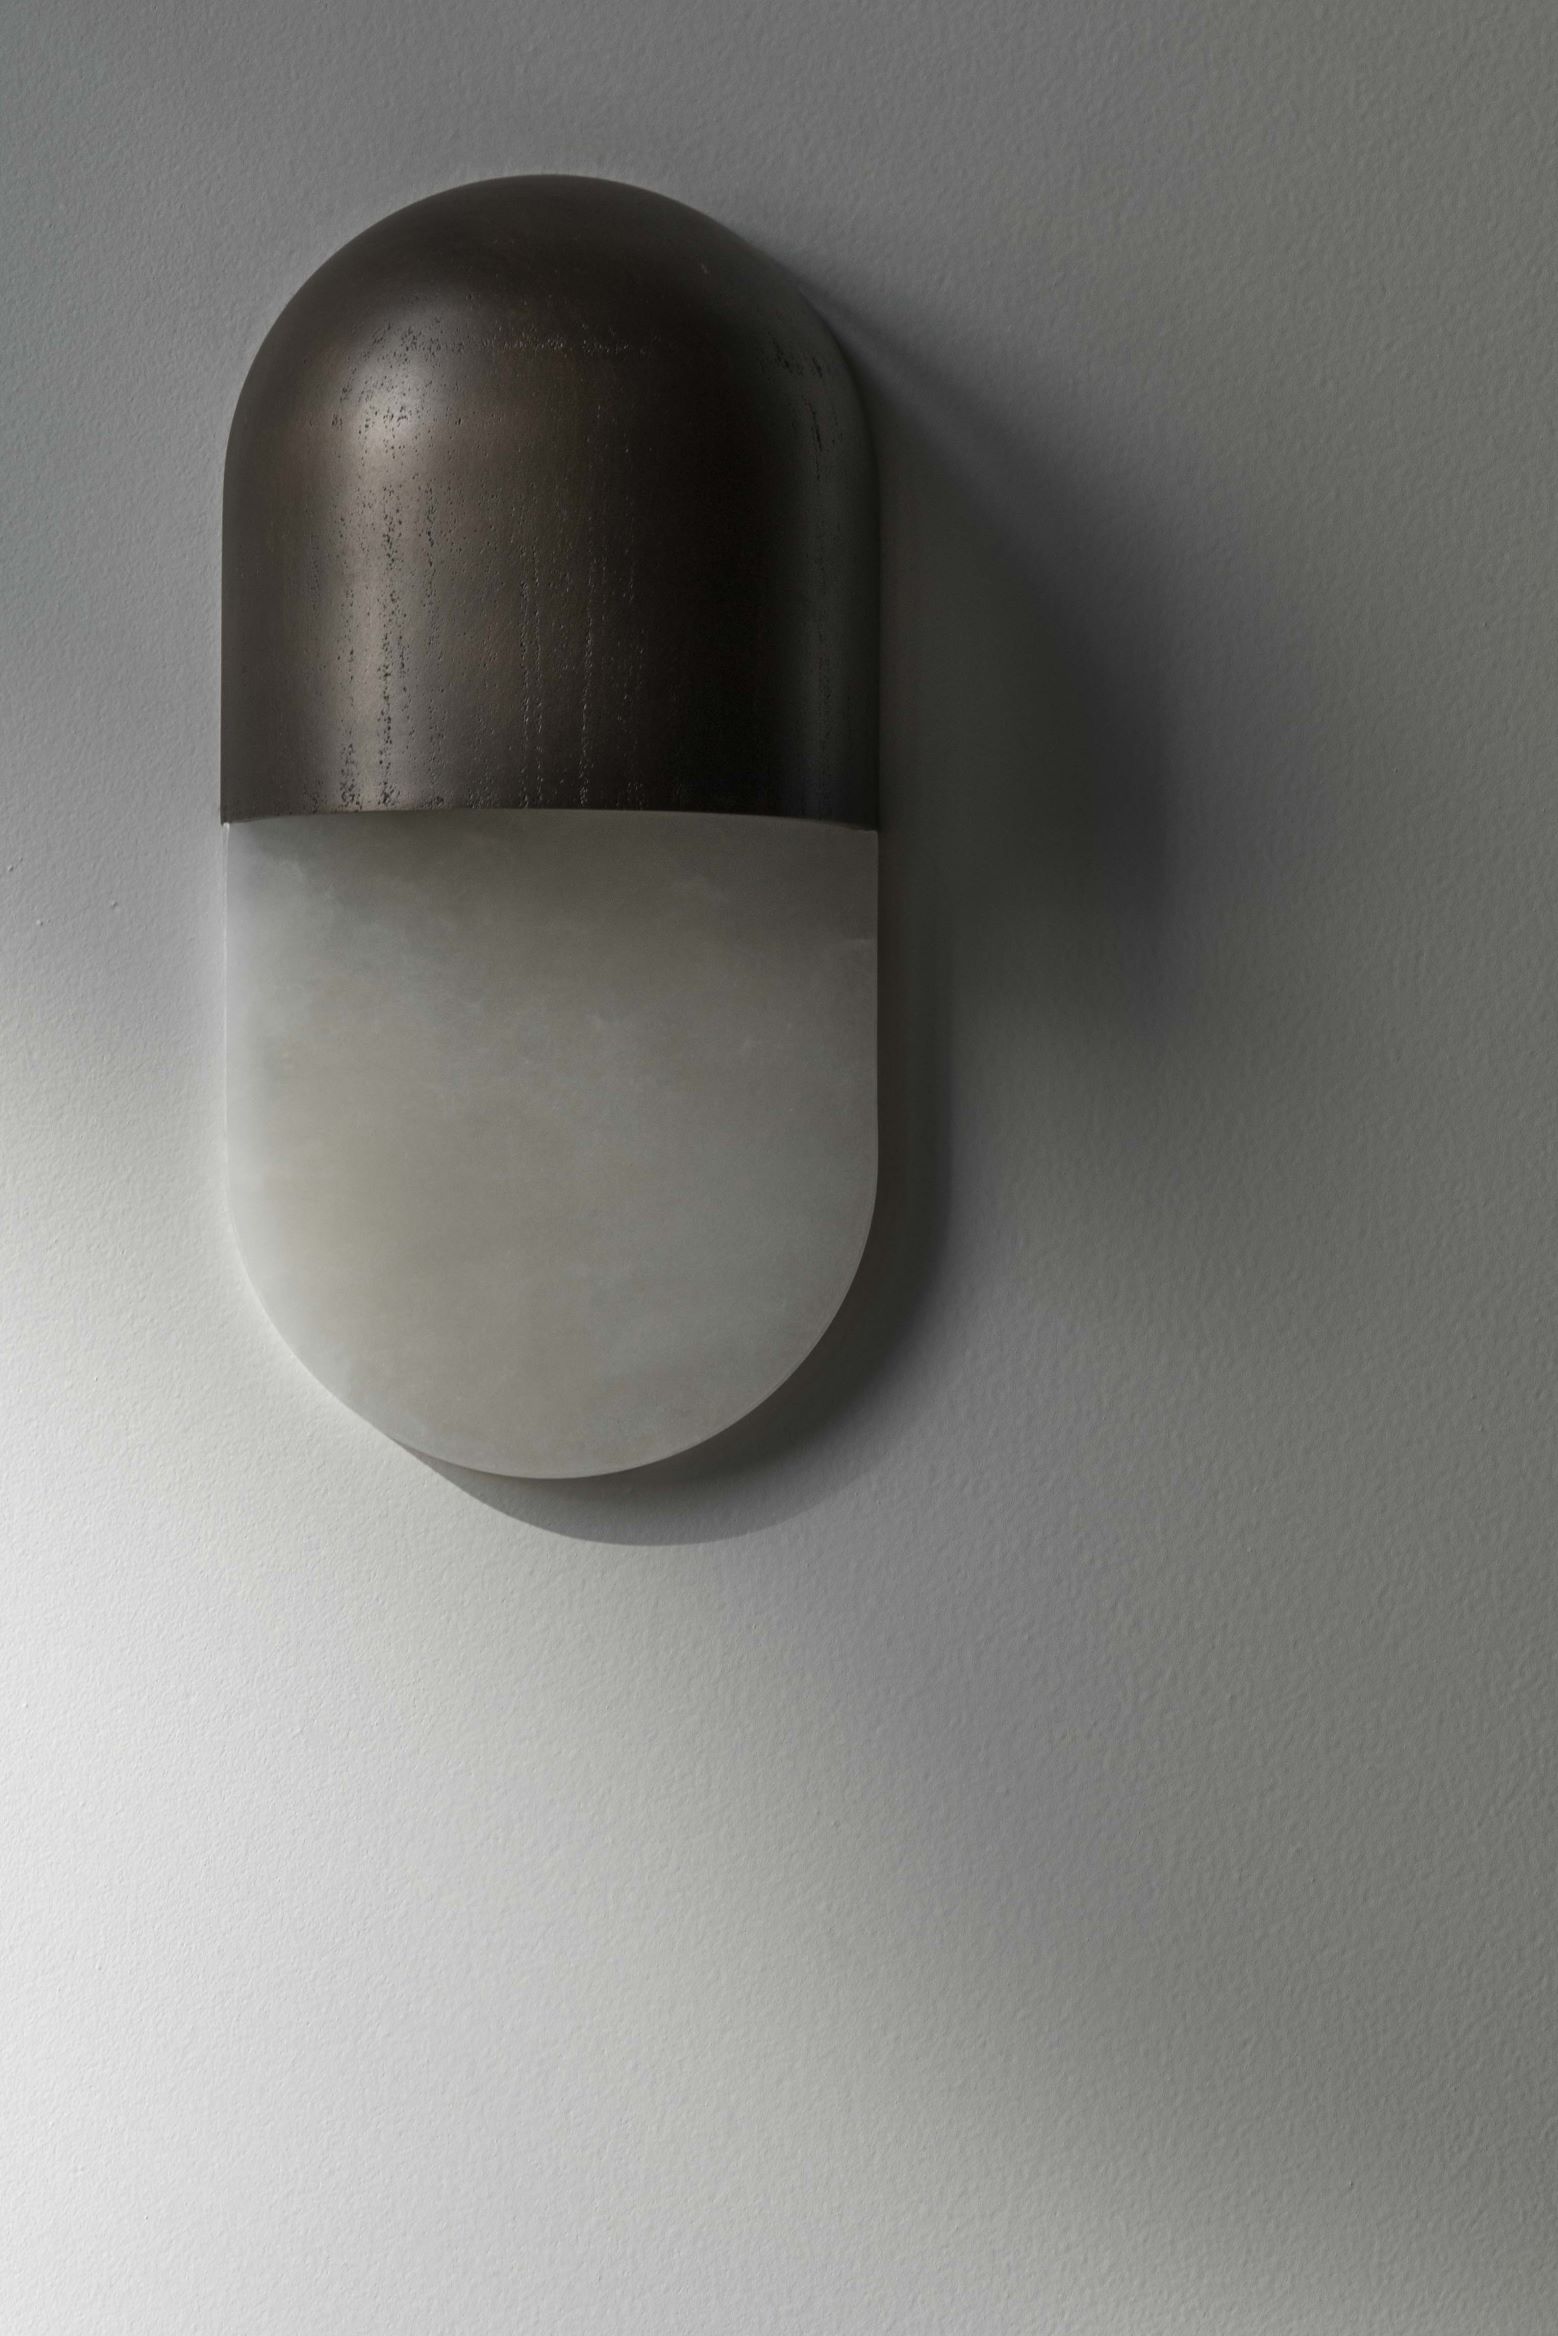 MARTEL WALL LAMP BY FELIX MILLORY DESIGN